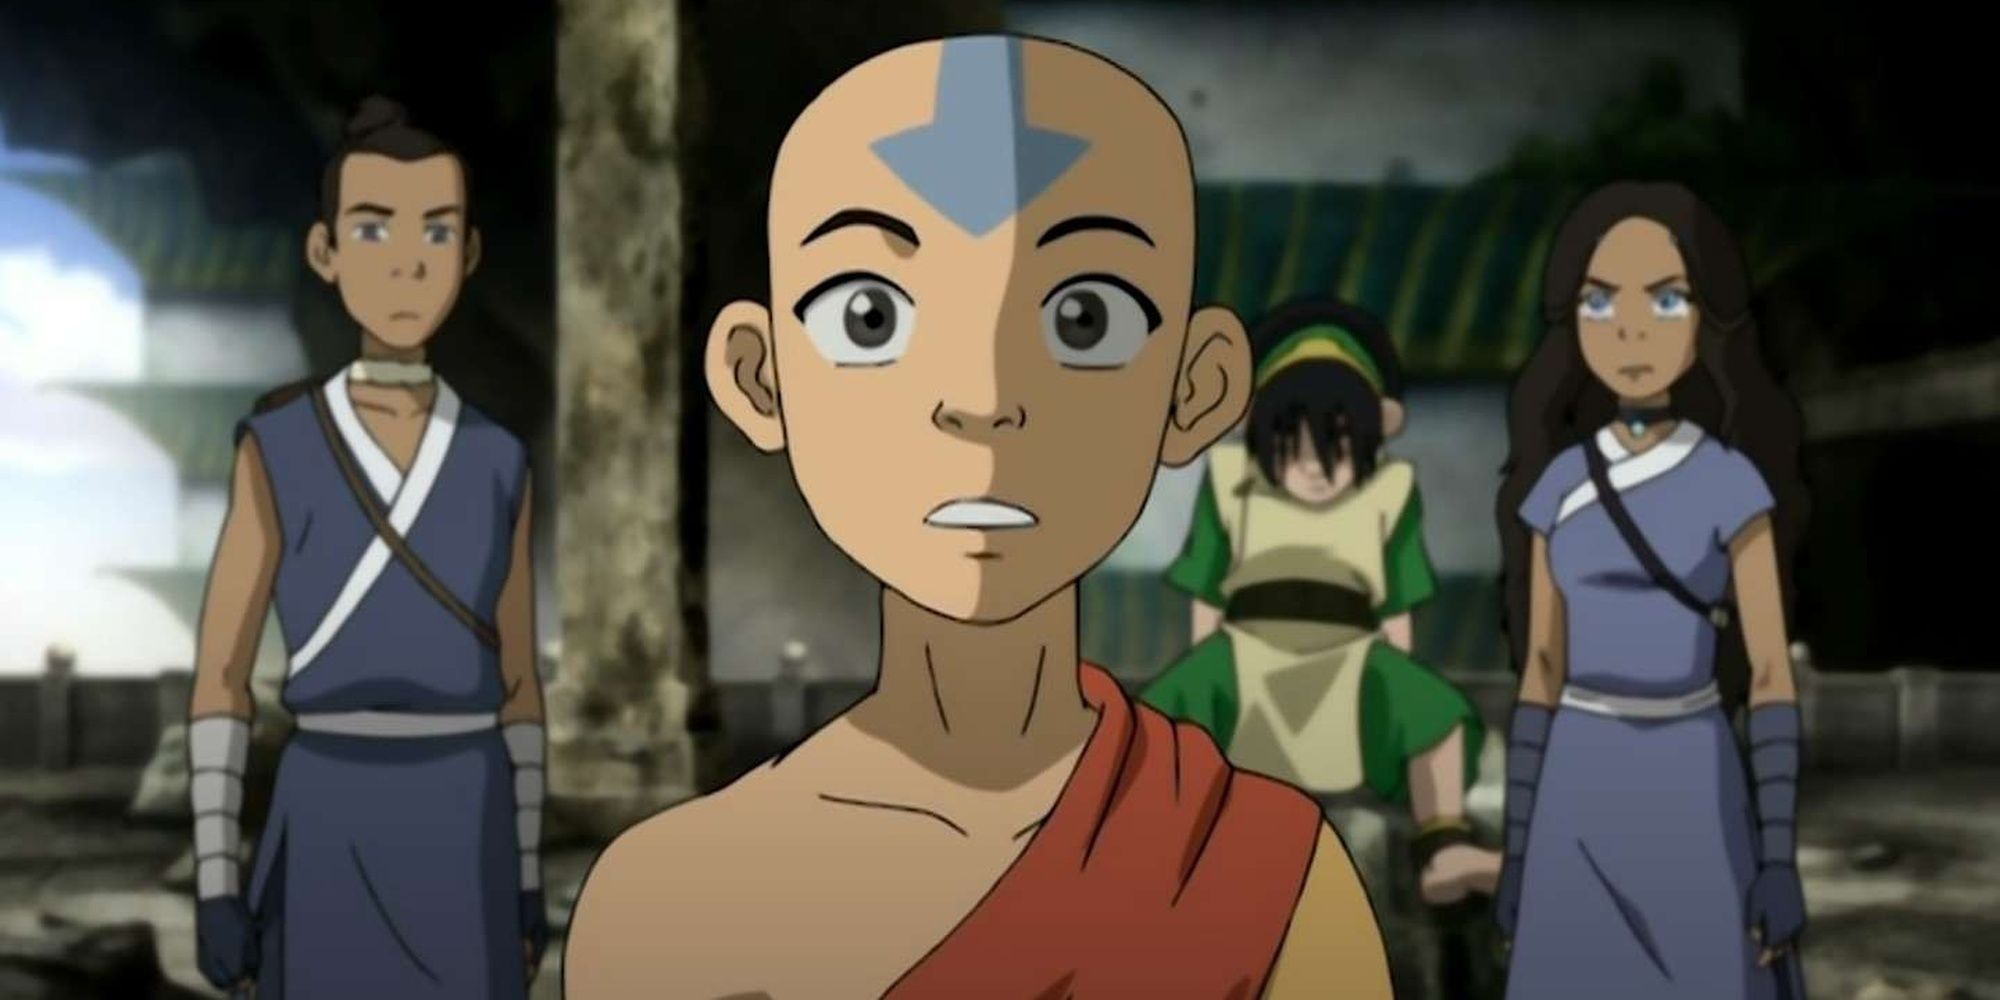 Avatar Aang with his friends at his back.